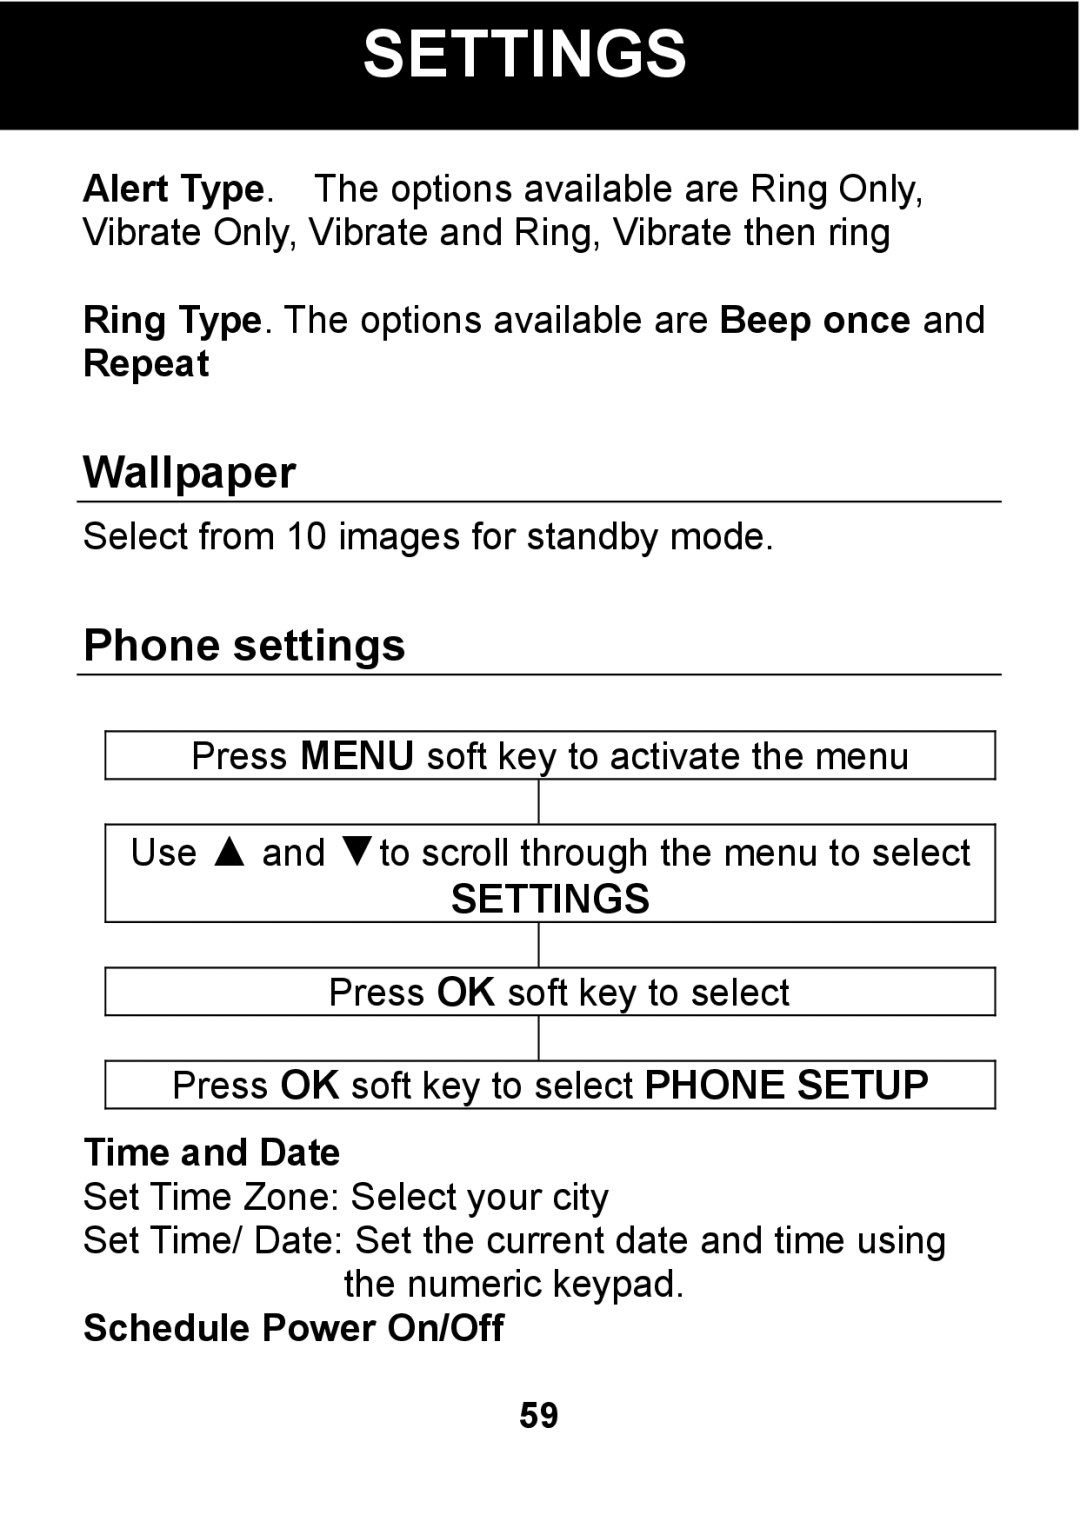 Pal/Pax PAL101 manual Wallpaper, Phone settings, Repeat, Time and Date, Schedule Power On/Off 